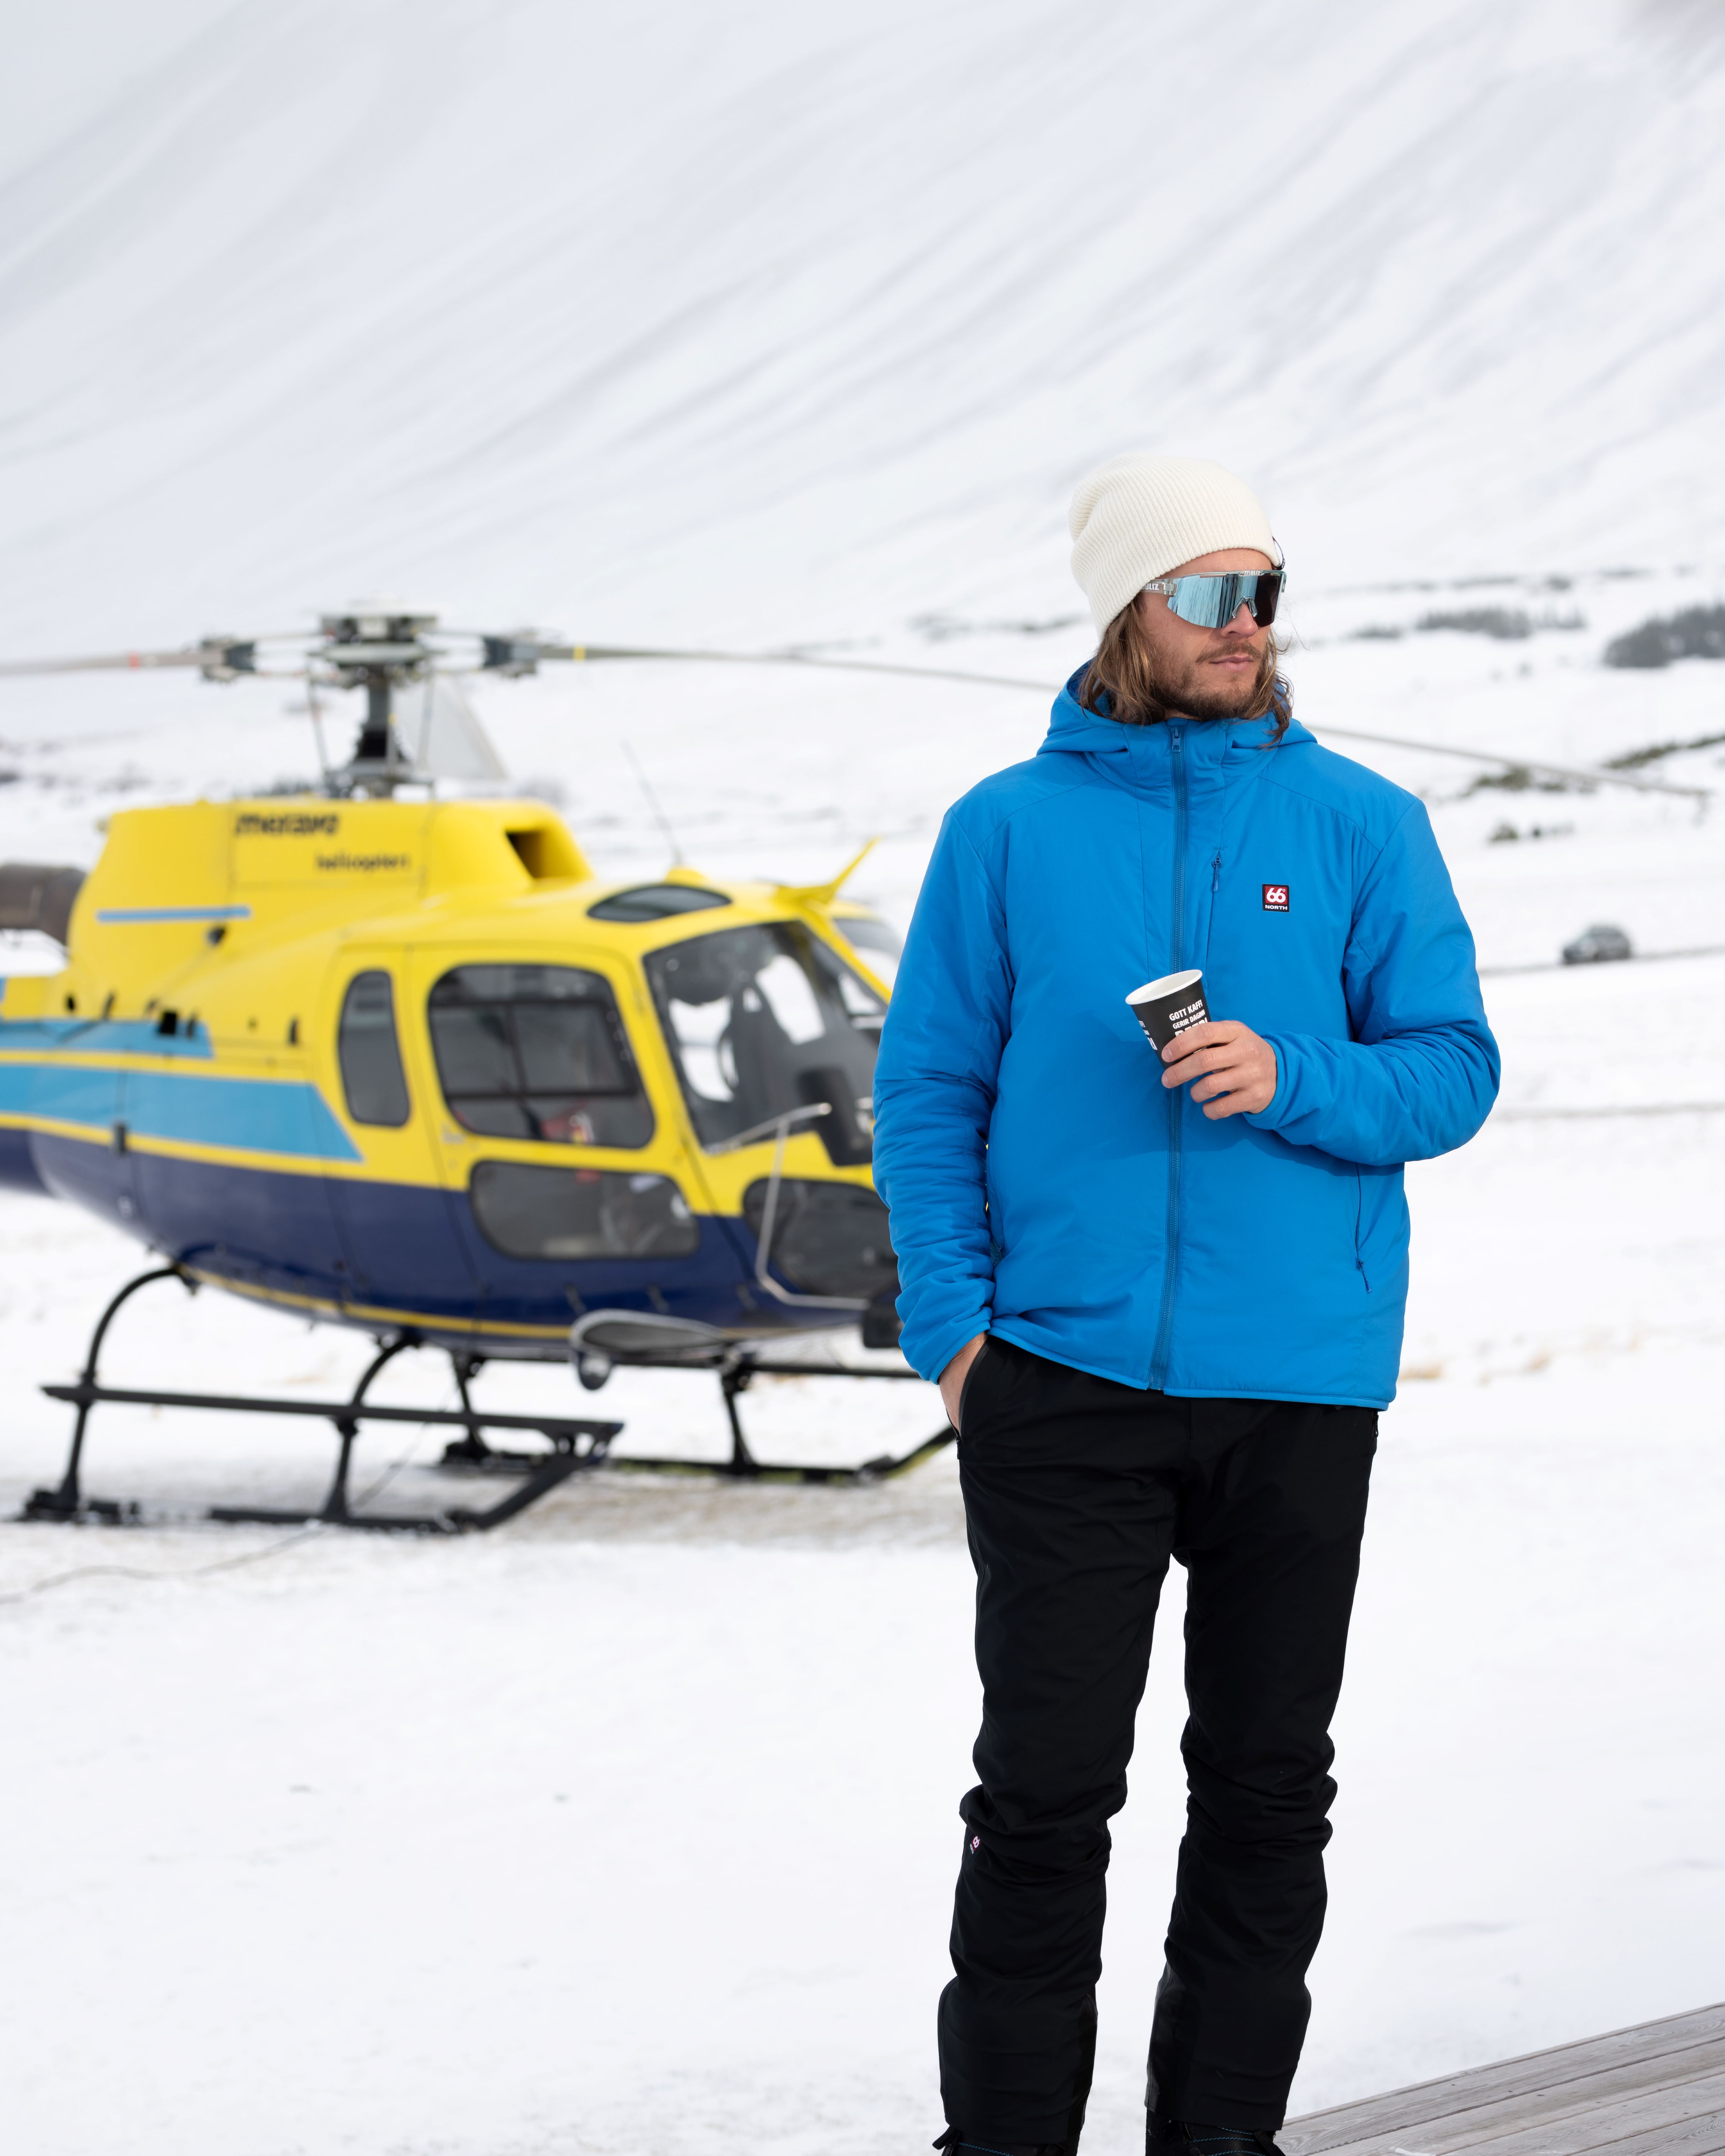 Rúrik Gíslason stands on snowy ground with a backdrop of snow-covered mountains and a helicopter used for heli-skiing adventures in North Iceland.